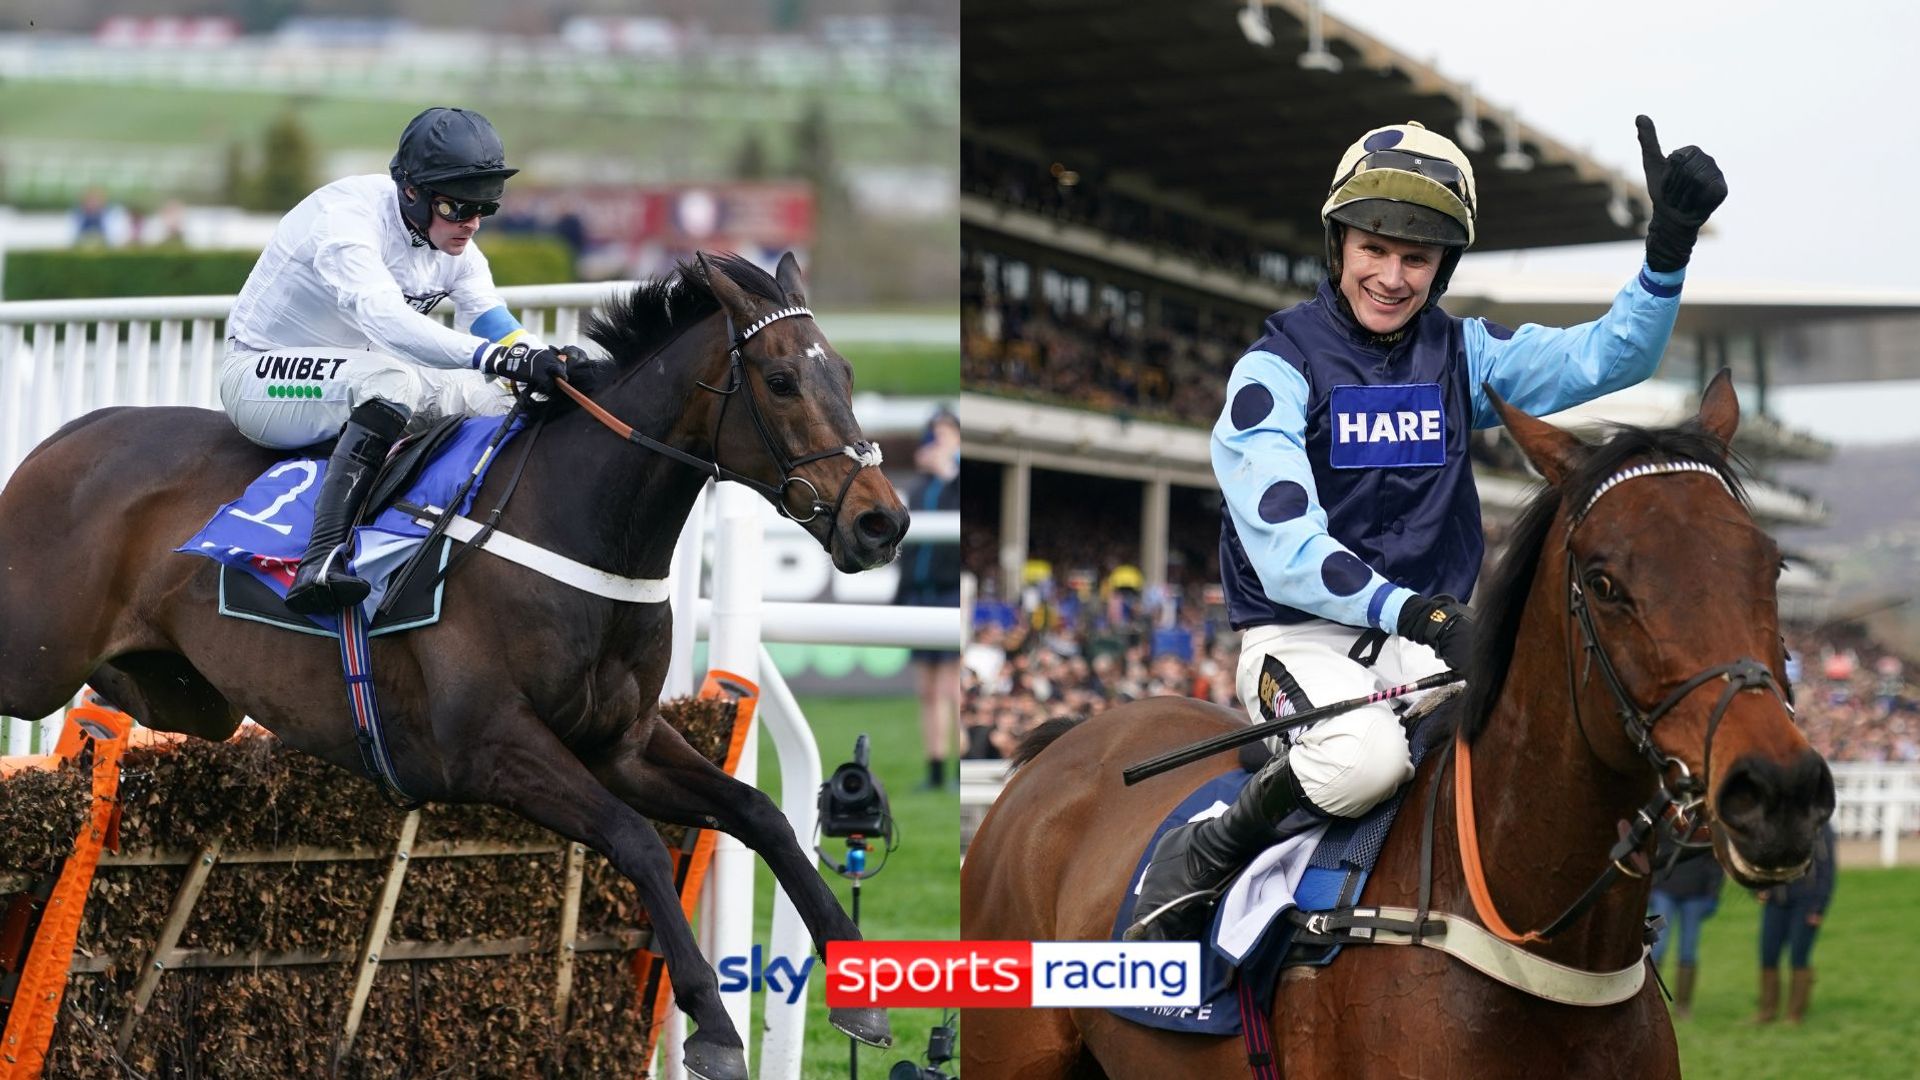 Structure Hill, Edwardstone characteristic in star-studded Ascot line-upSkySports | Information